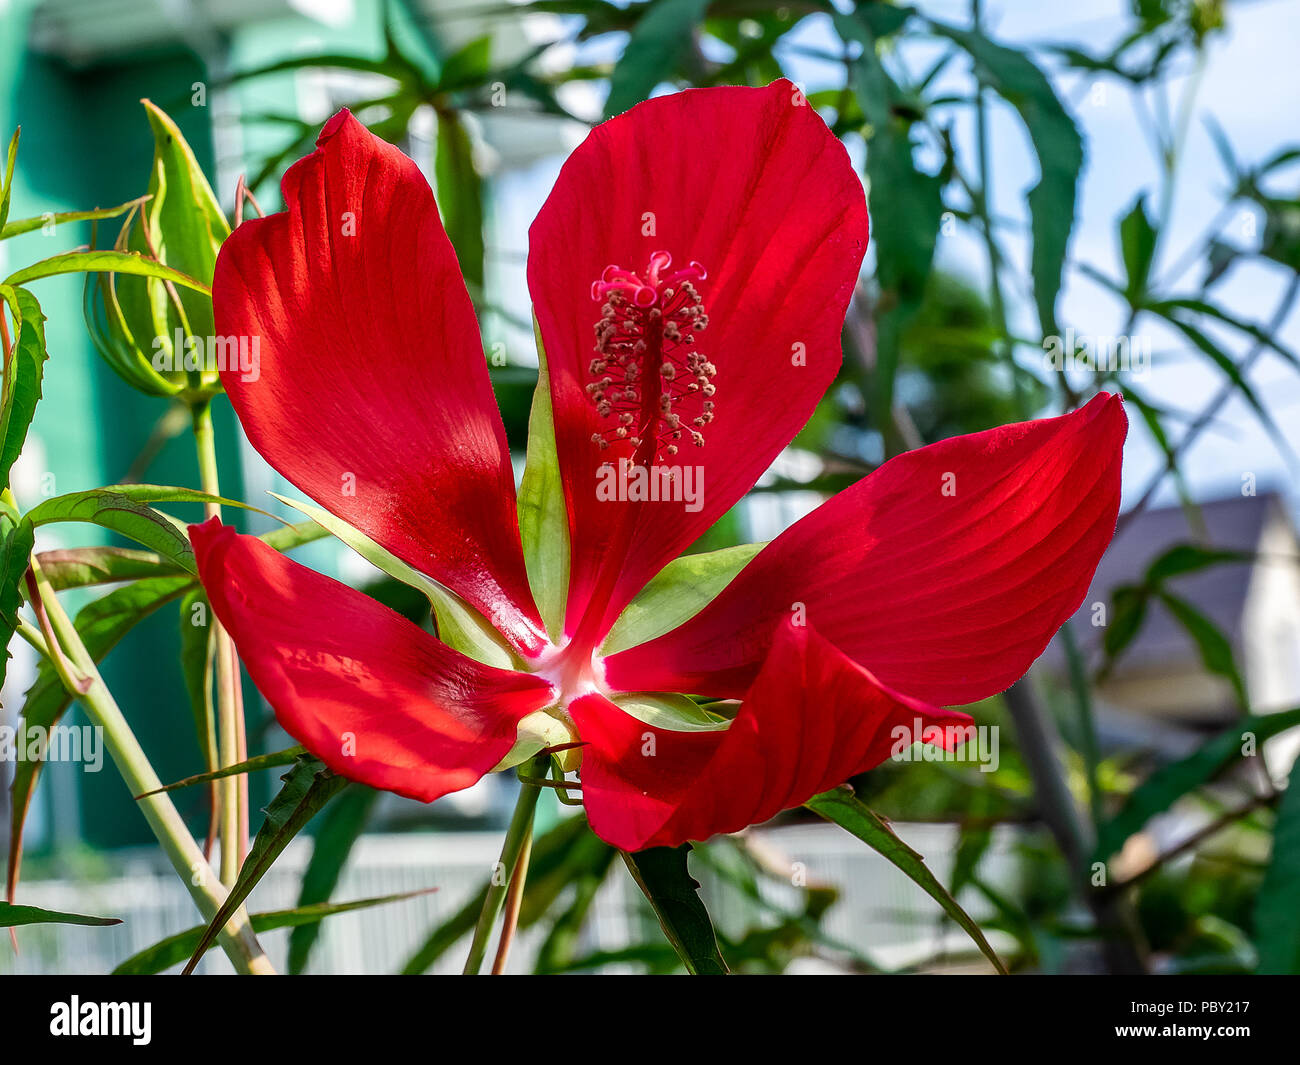 A lage scarlet rosemallow flower, a type of hibiscus, blooms in brilliant color along a roadside in a small Japanese garden. Stock Photo